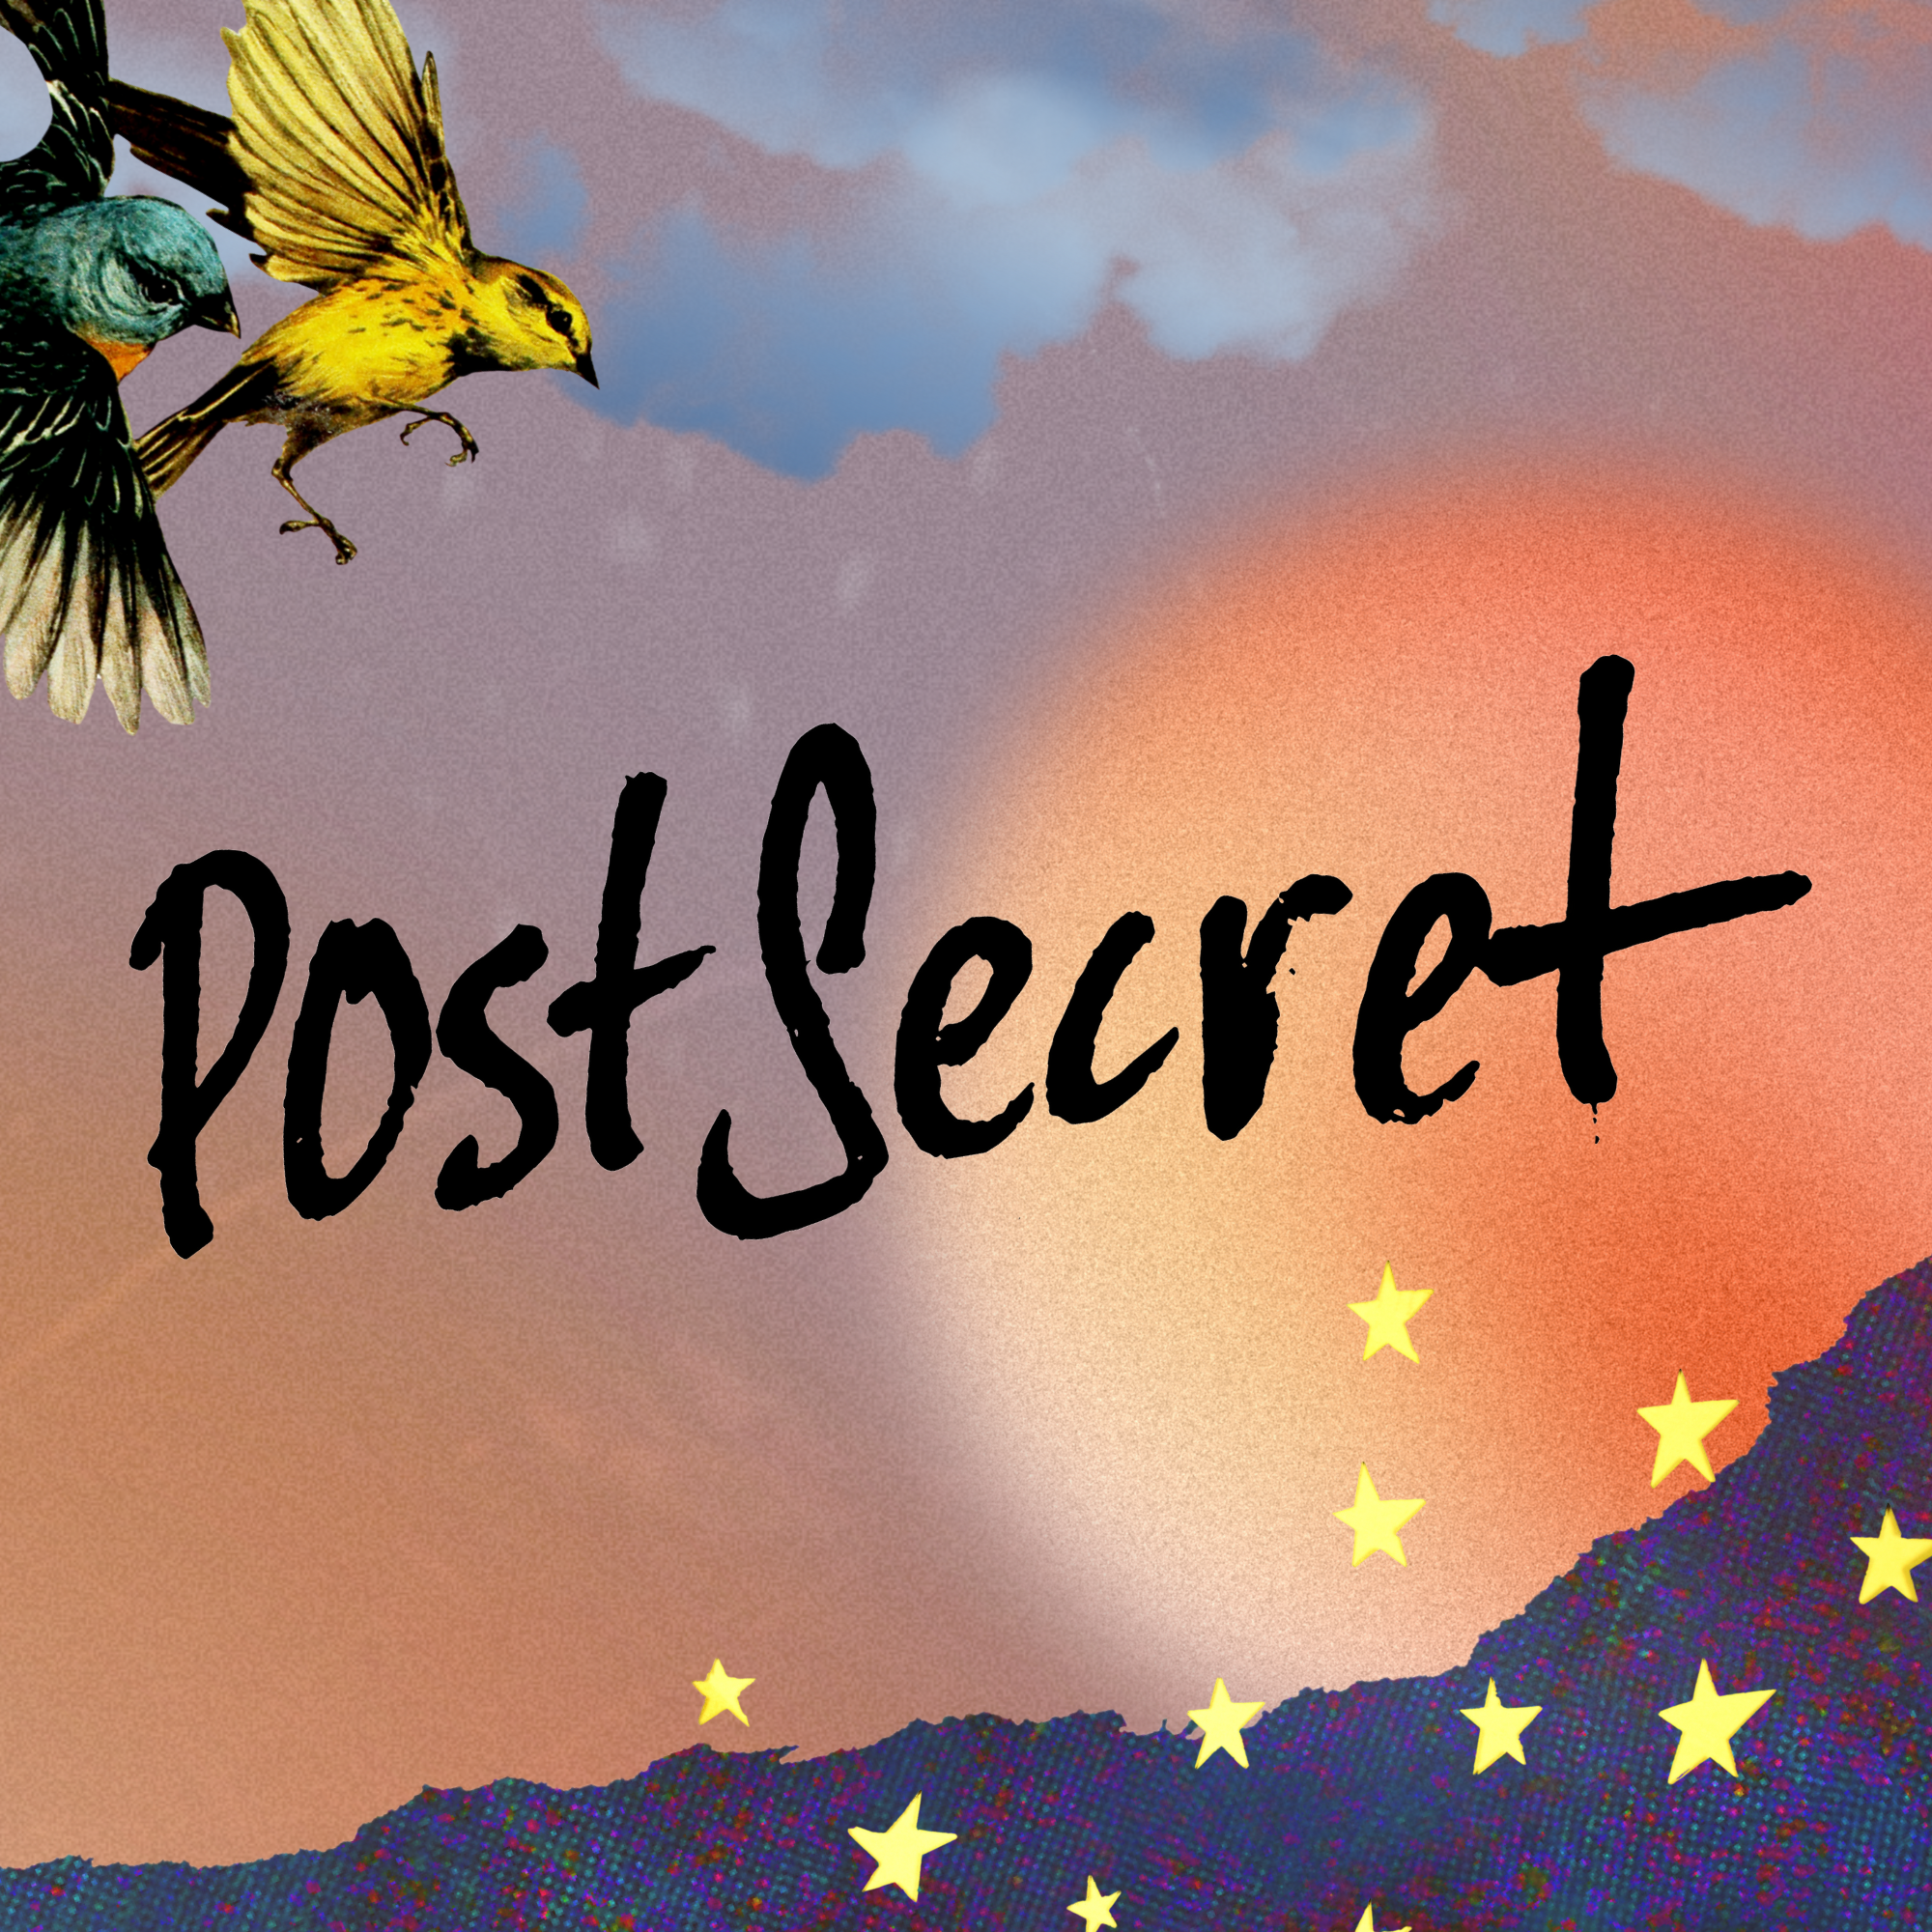 Colorful graphic image with a collage of birds, stars, and clouds on a purple and orange background. Text in the center of the graphic says PostSecret Live with Frank Warren